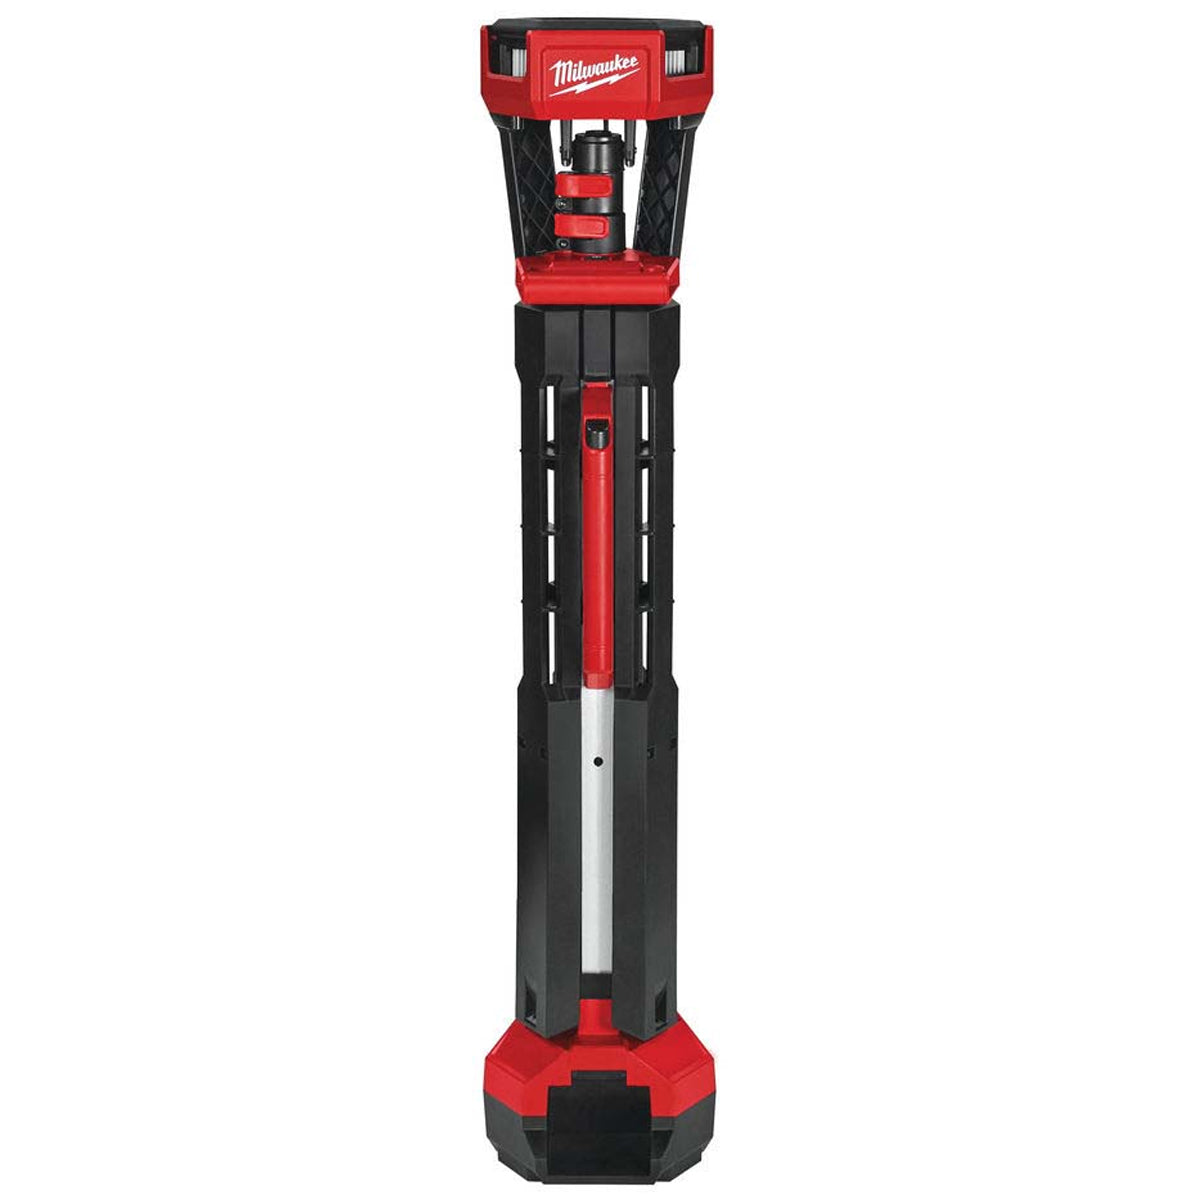 Milwaukee M18SAL2-0 18V LED Stand Light with 1 x 5.0Ah Battery & Charger